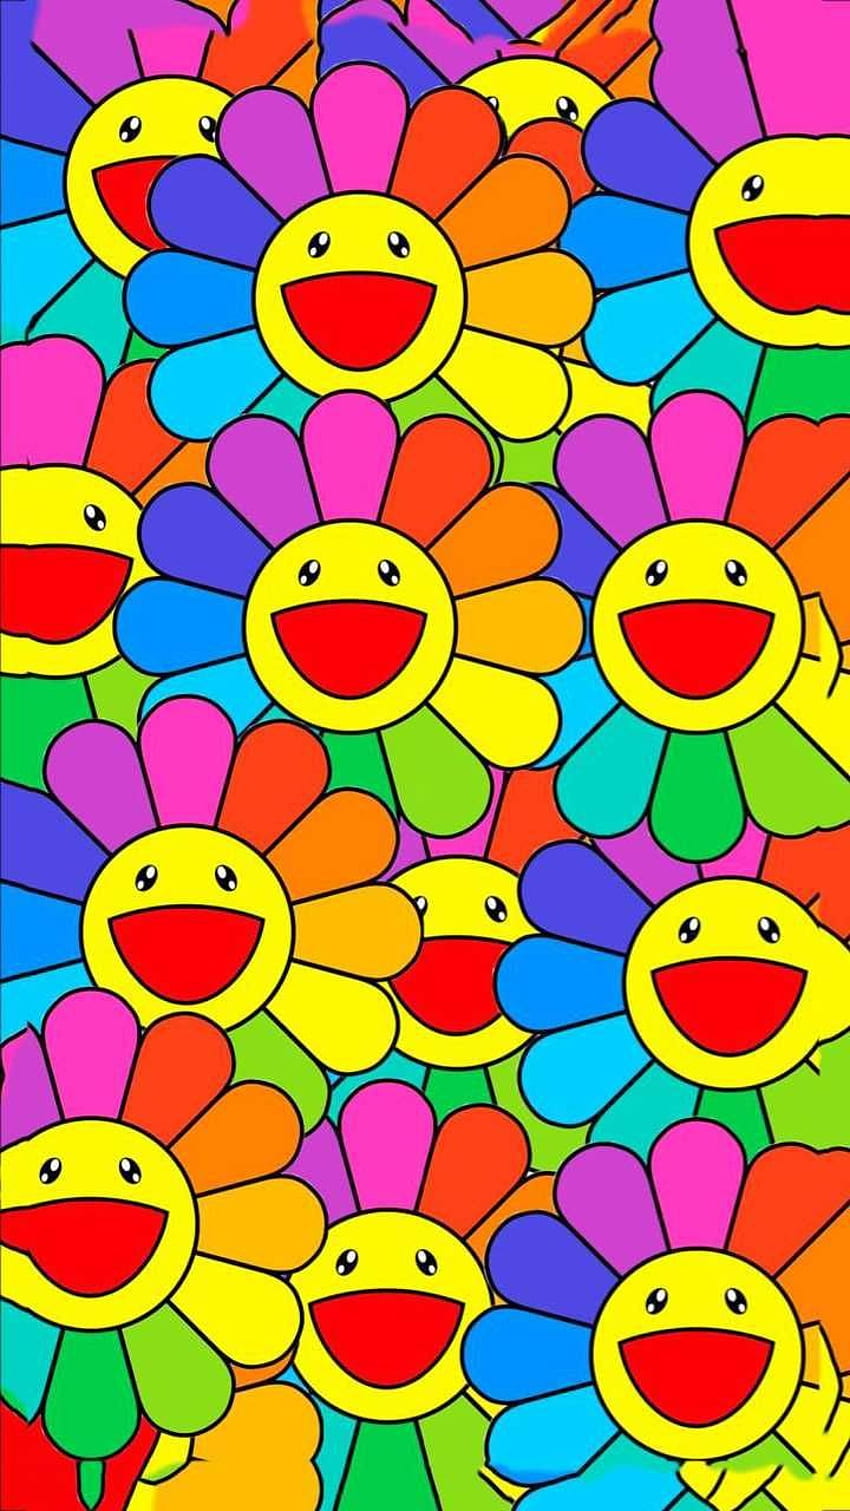 A colorful smiley face wallpaper - Colorful